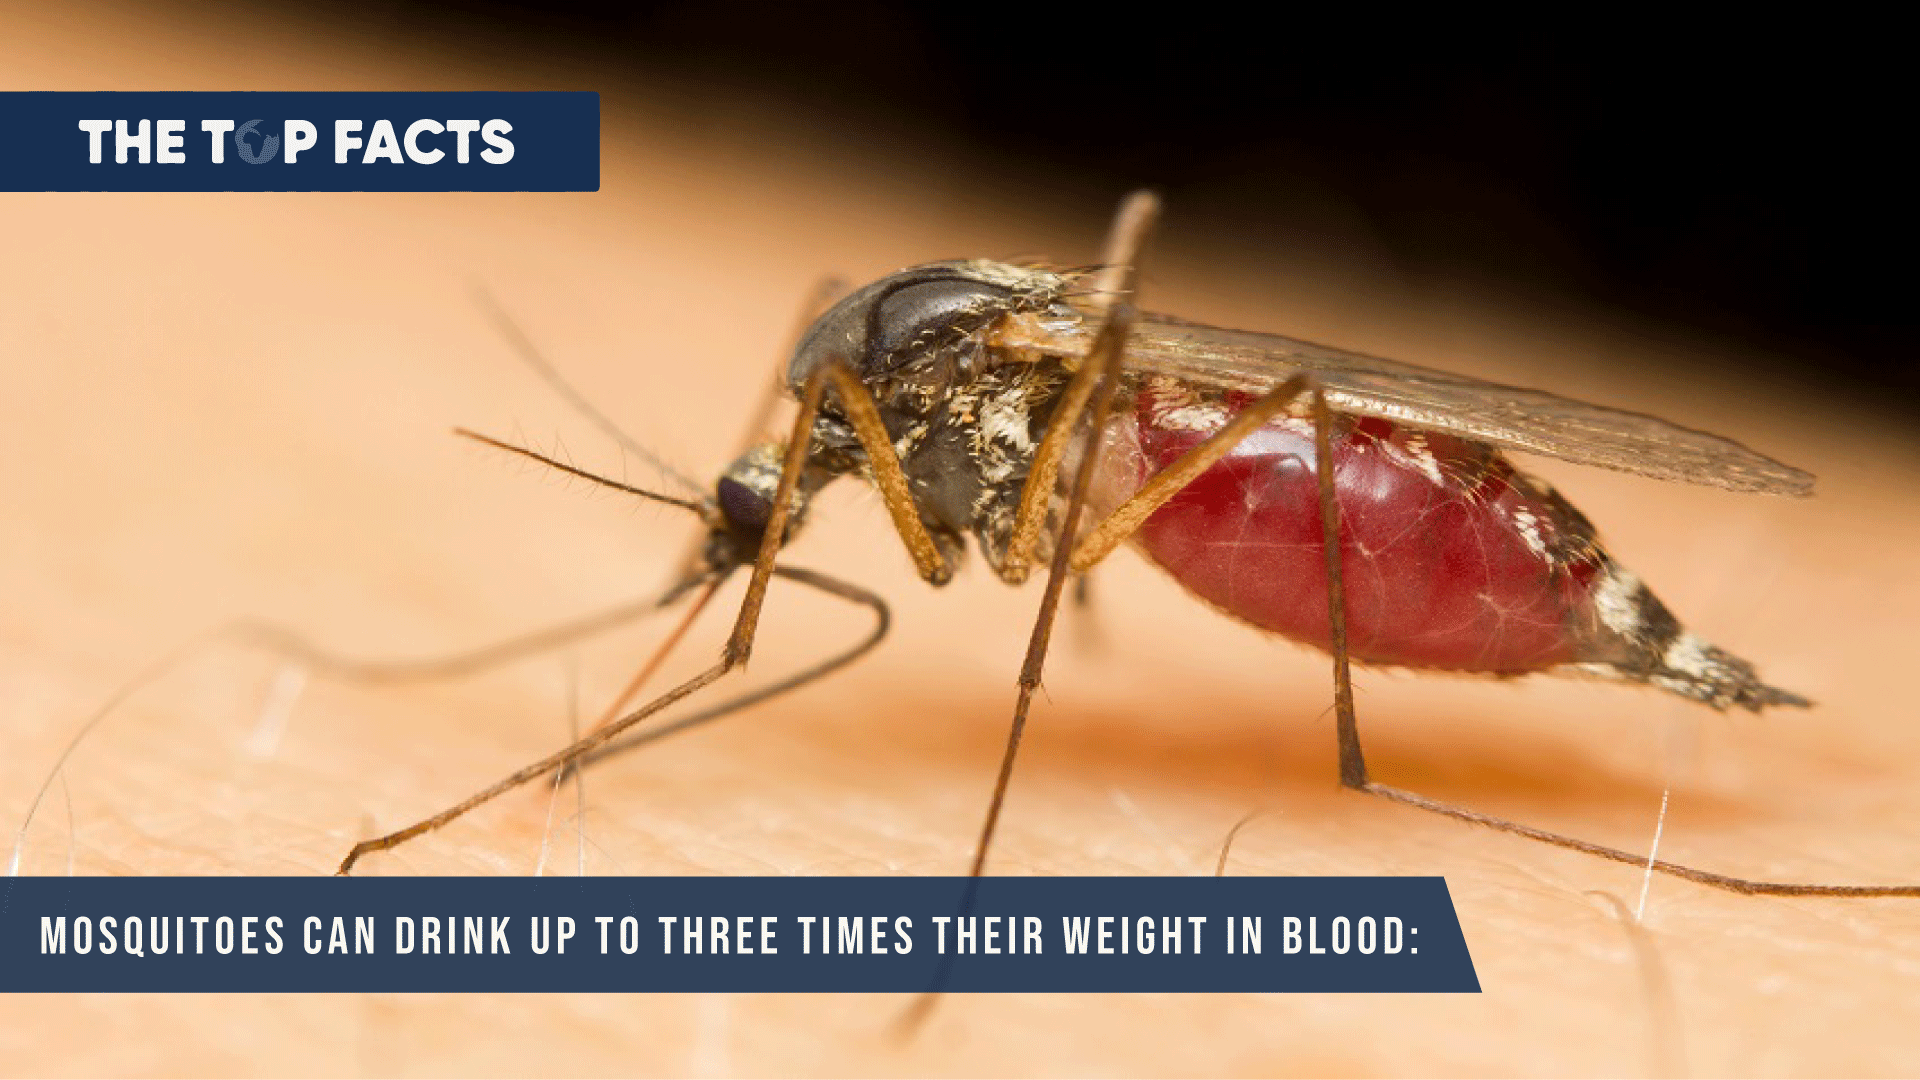 Mosquitoes can drink up to three times their weight in blood